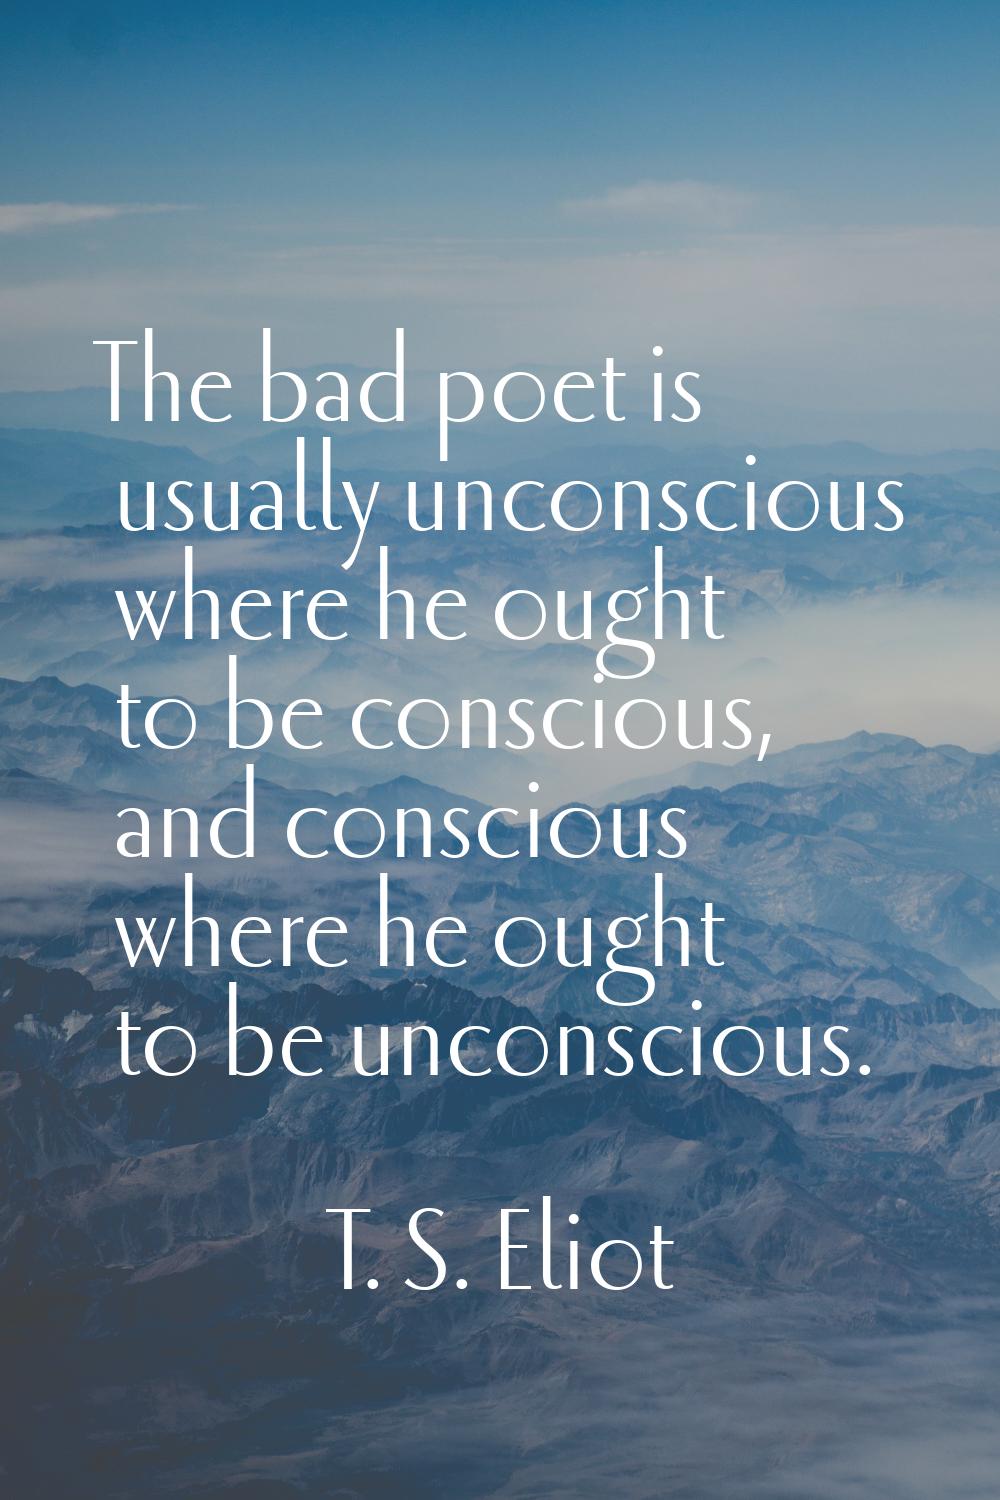 The bad poet is usually unconscious where he ought to be conscious, and conscious where he ought to